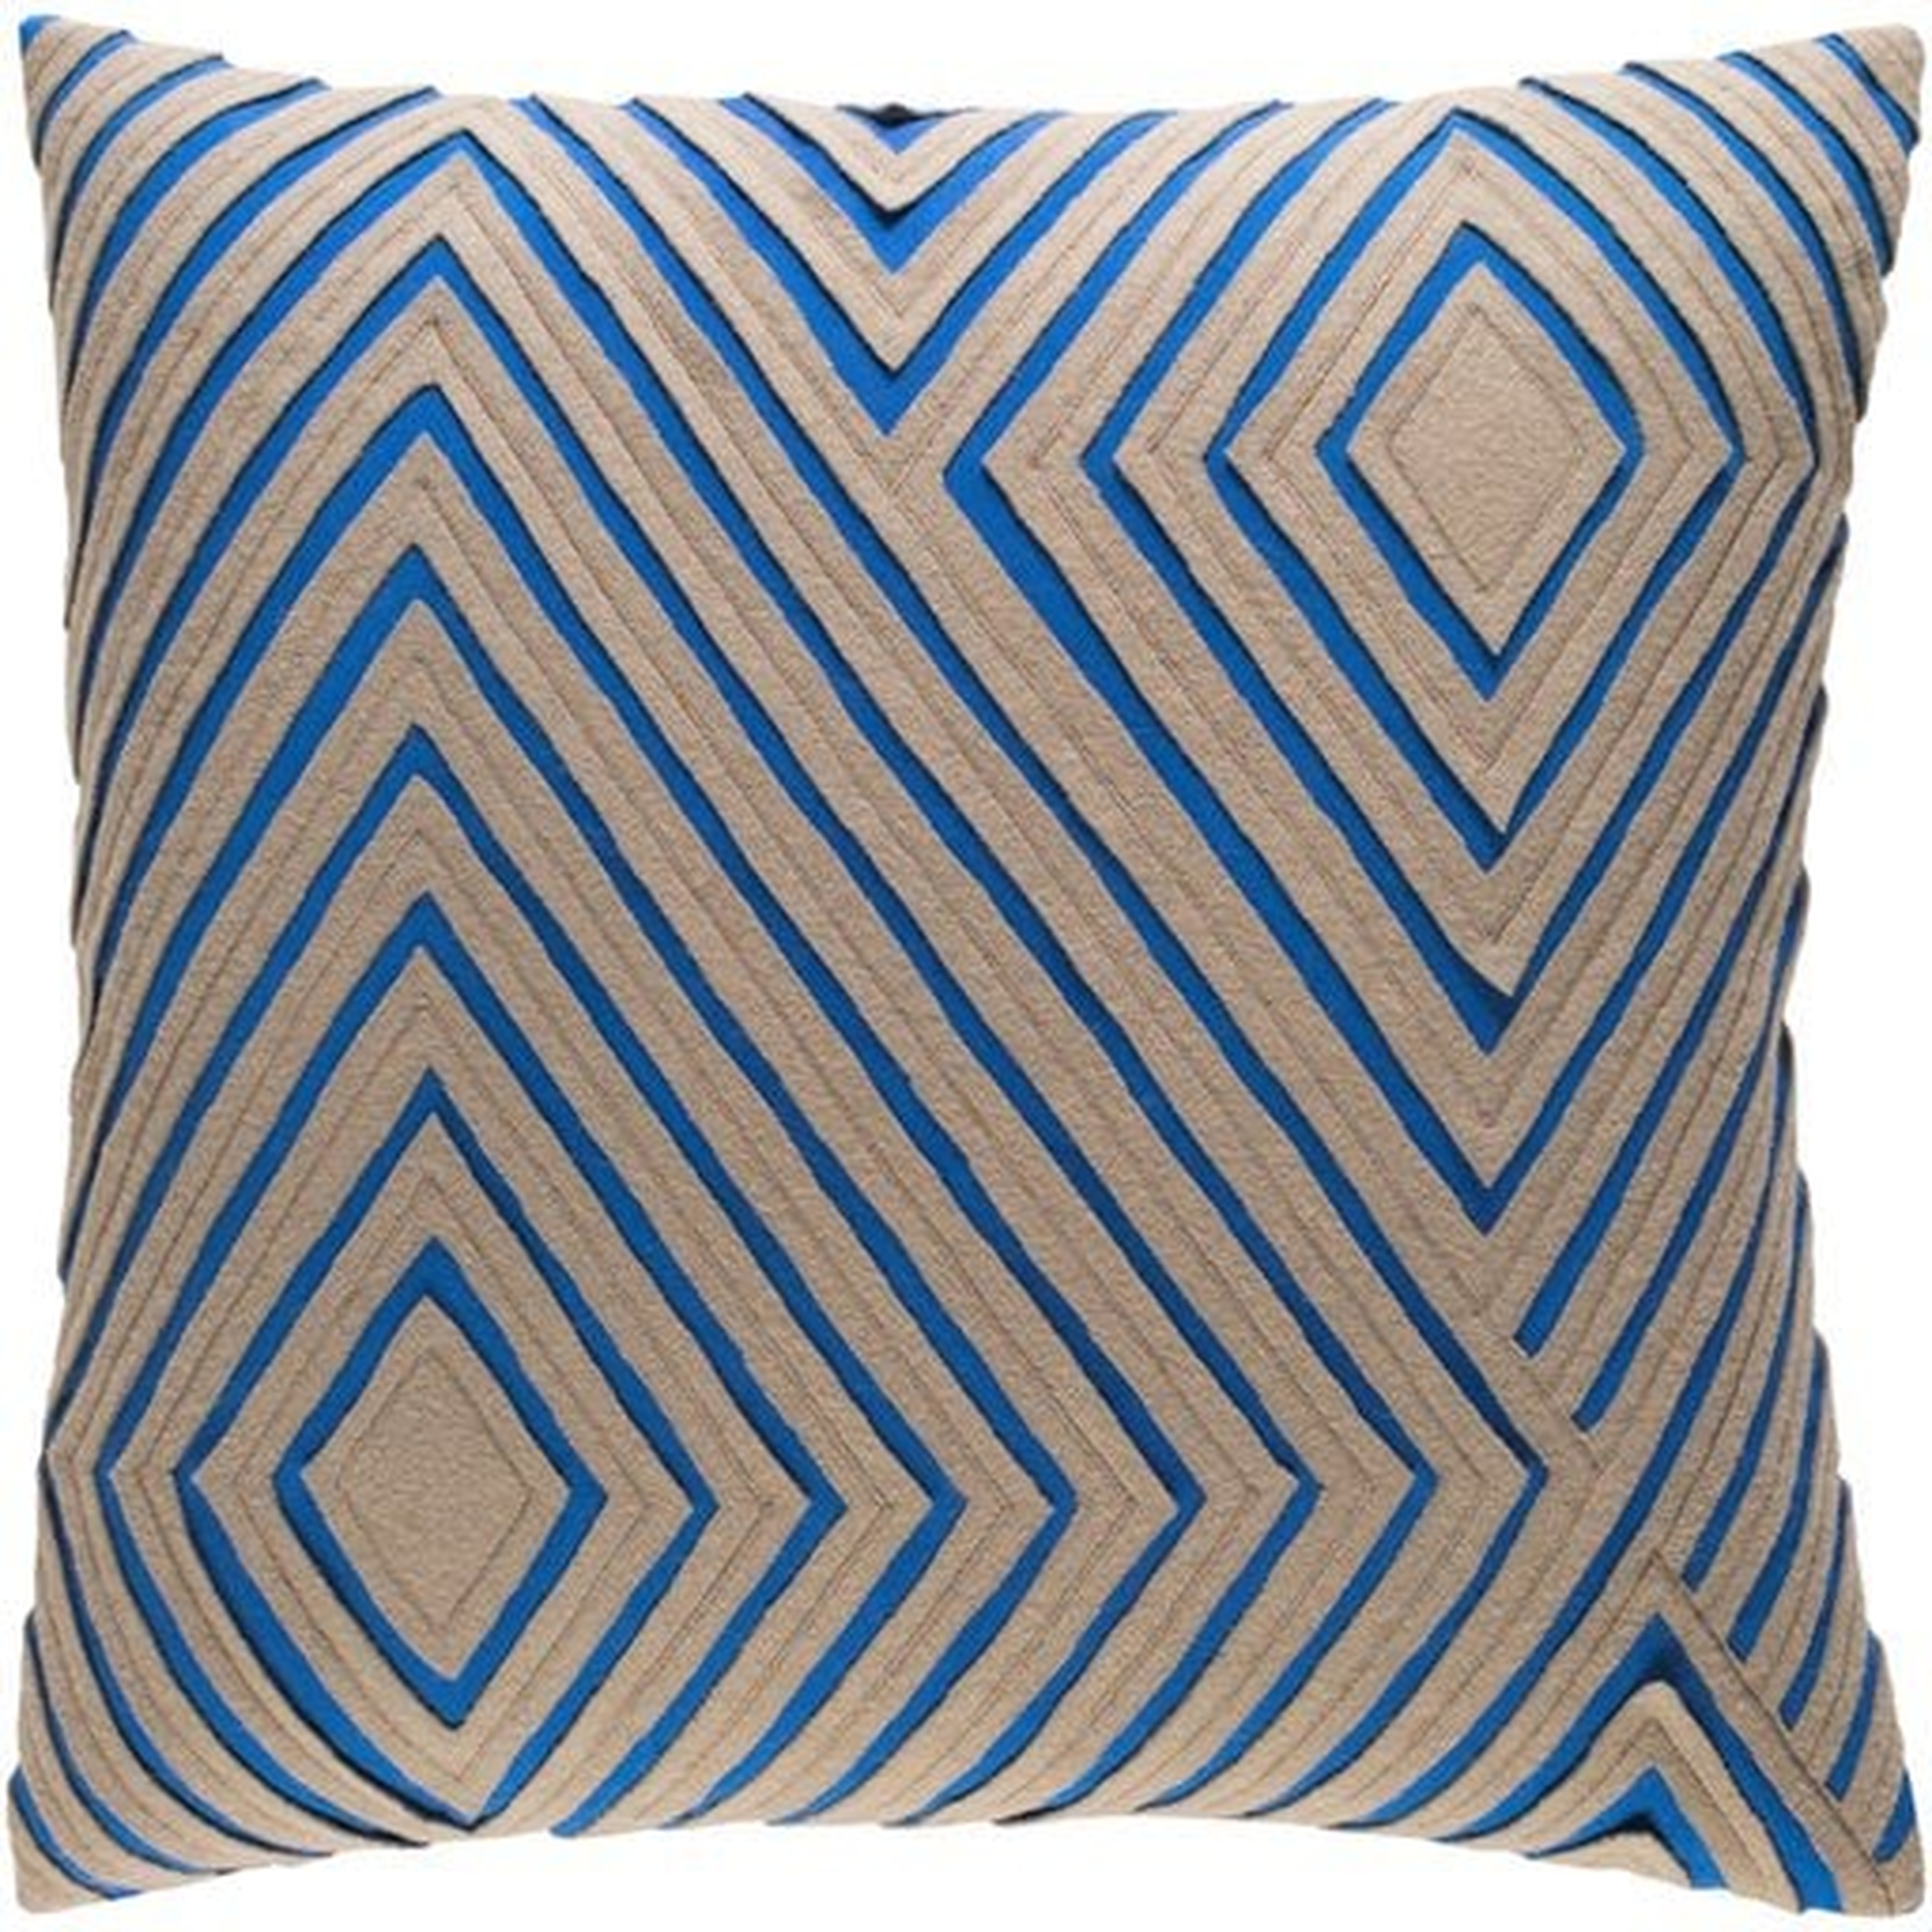 Denmark Throw Pillow, 20" x 20", with poly insert - Surya